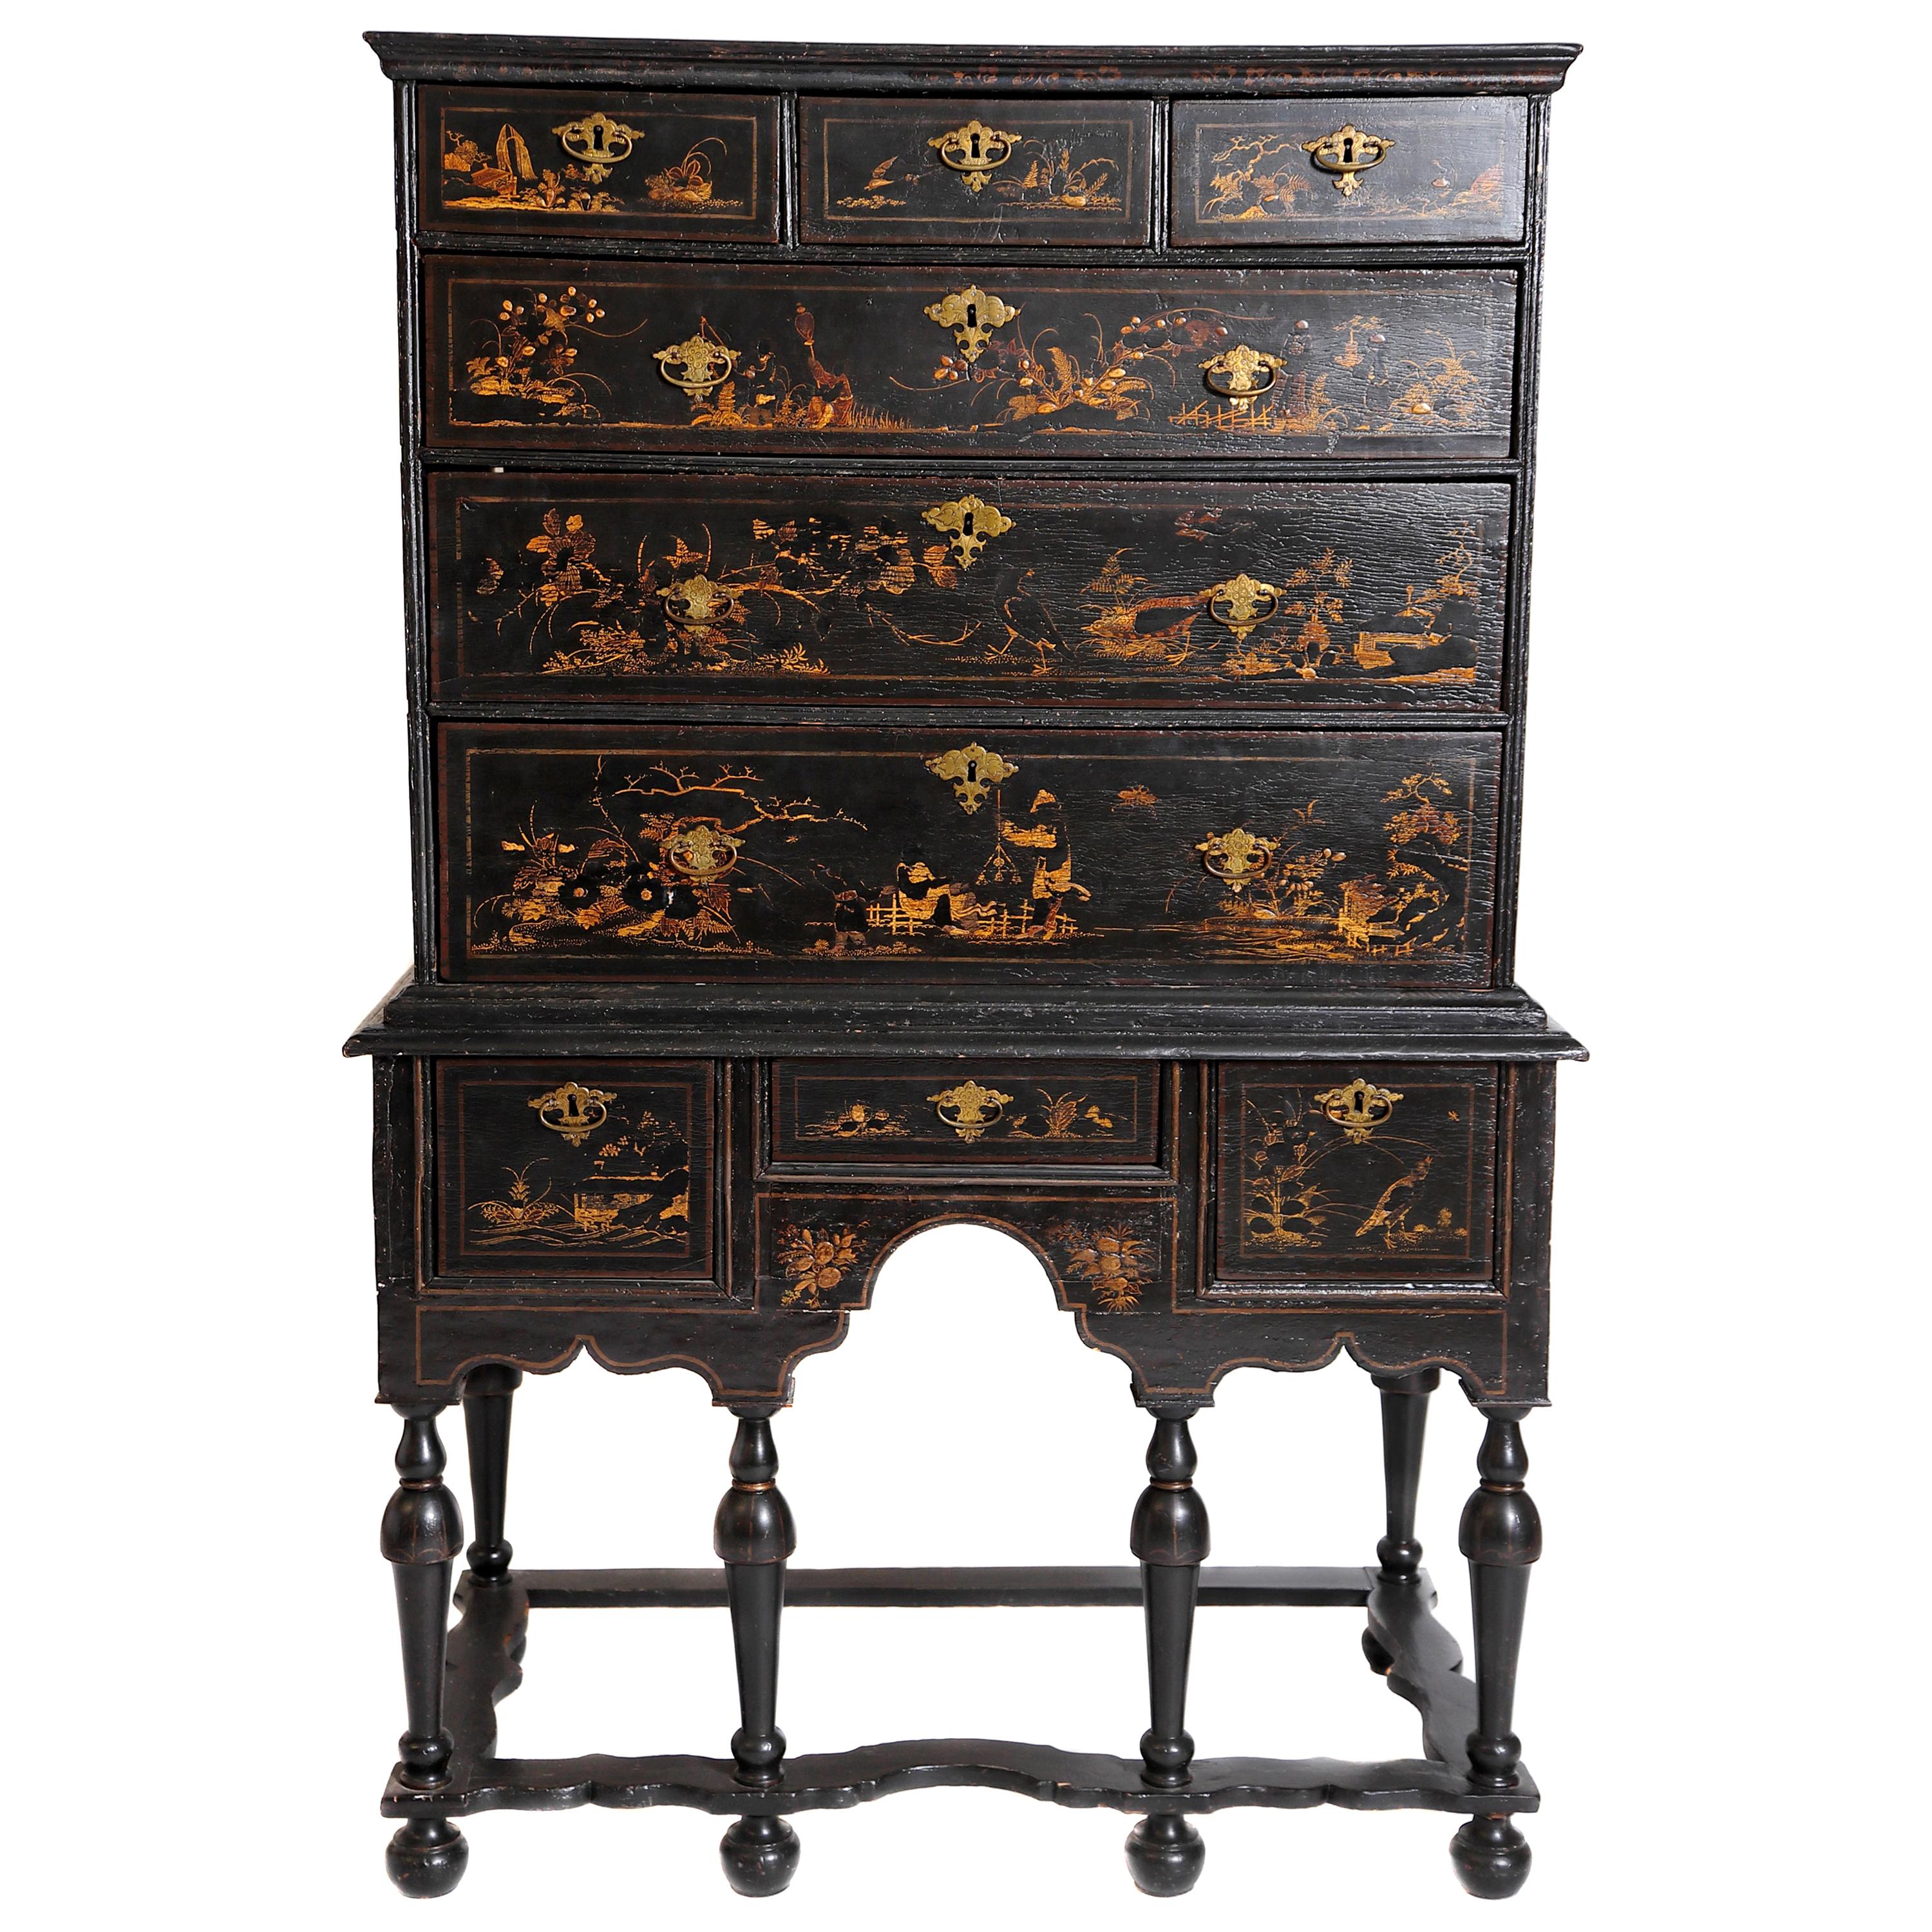 William & Mary Chest on Stand / Black Lacquer and Gilt Chinoiserie Decoration